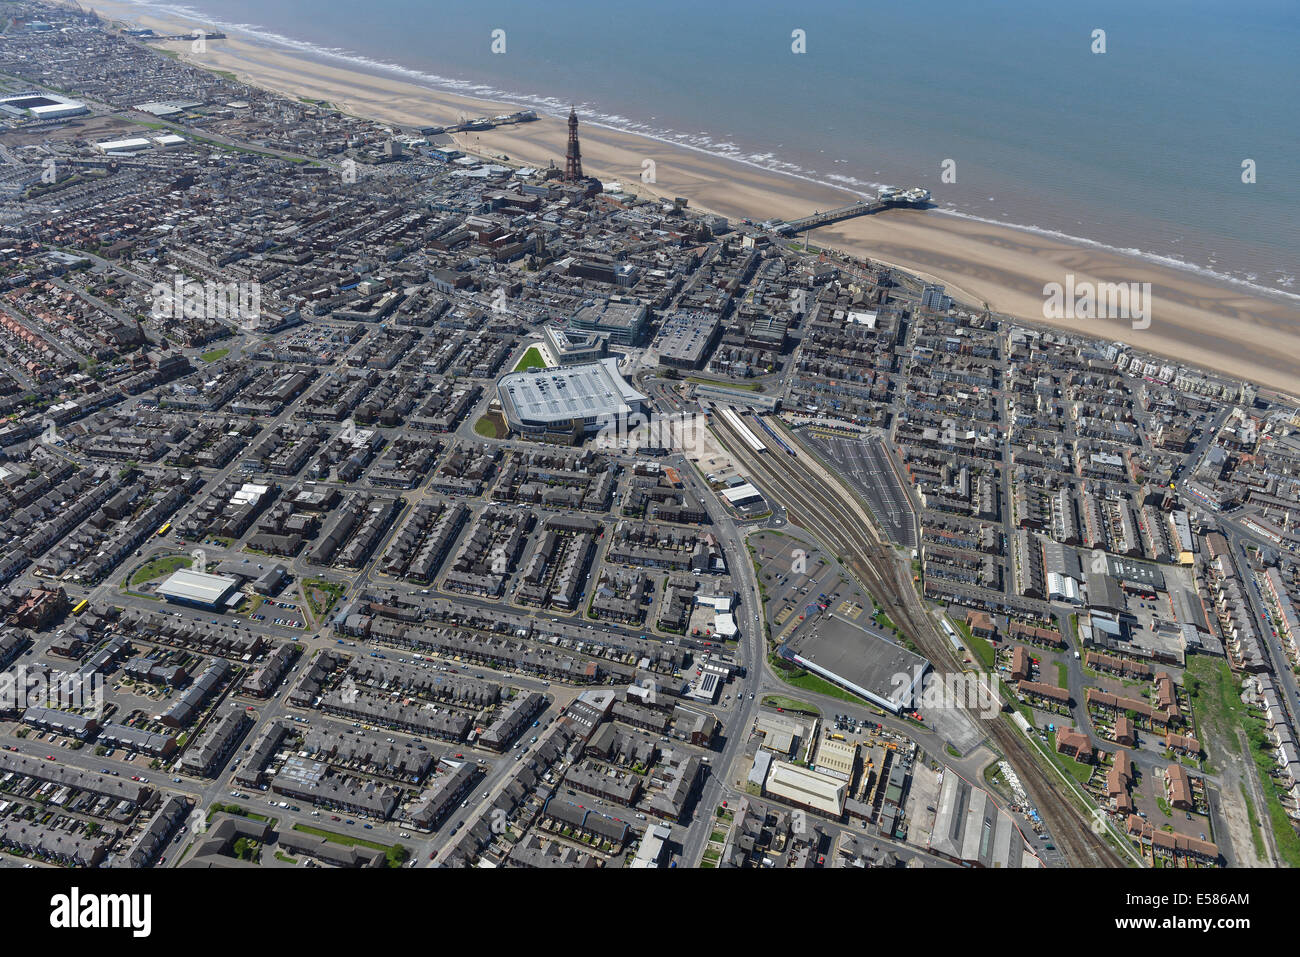 An aerial view of Blackpool in Lancashire, showing the town, railway station, beach, piers and tower. Stock Photo